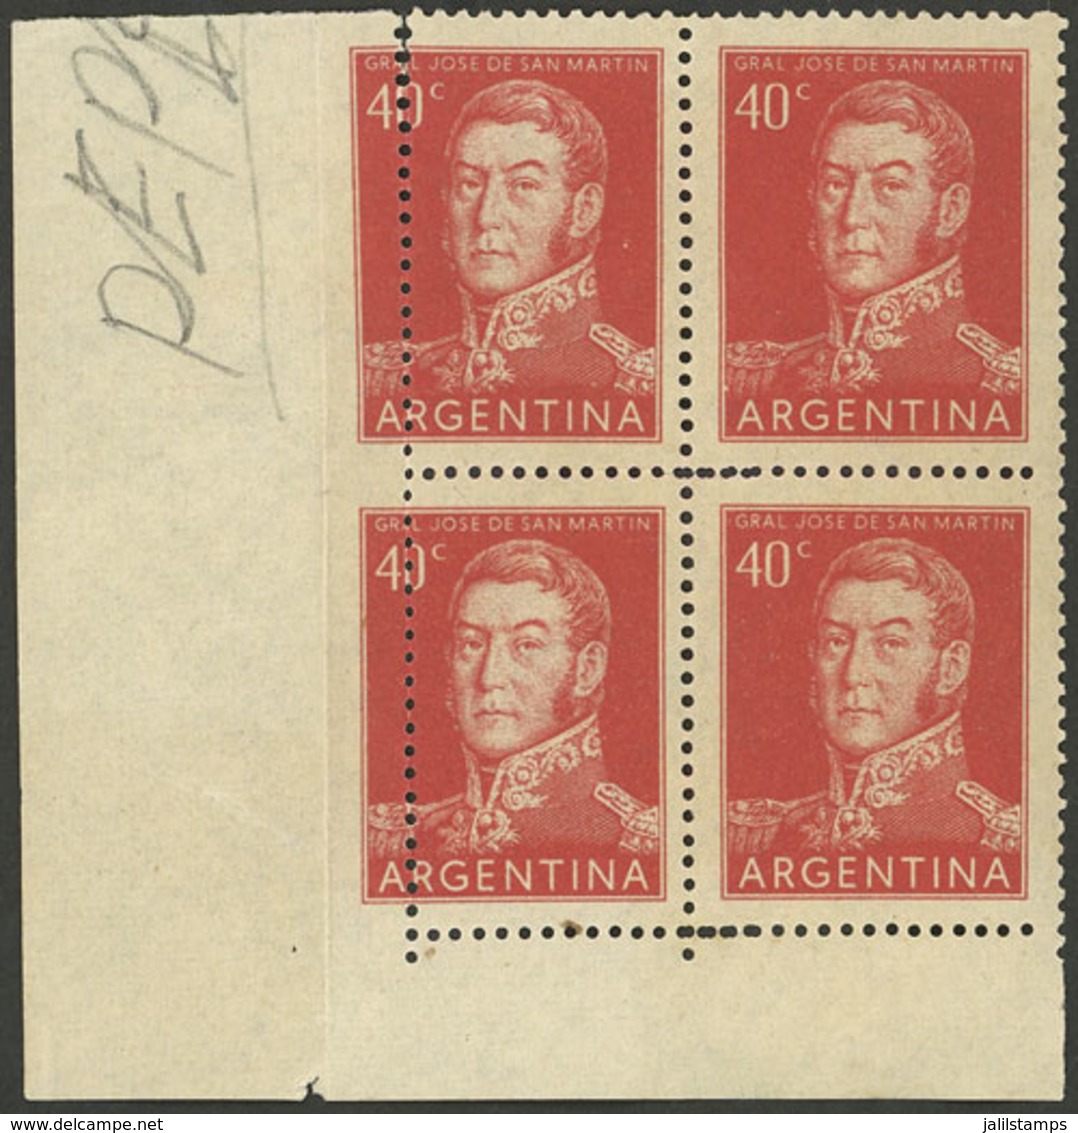 ARGENTINA: GJ.1041, Corner Block Of 4 With LEFT PERFORATION SHIFTED, Very Attractive! - Unused Stamps